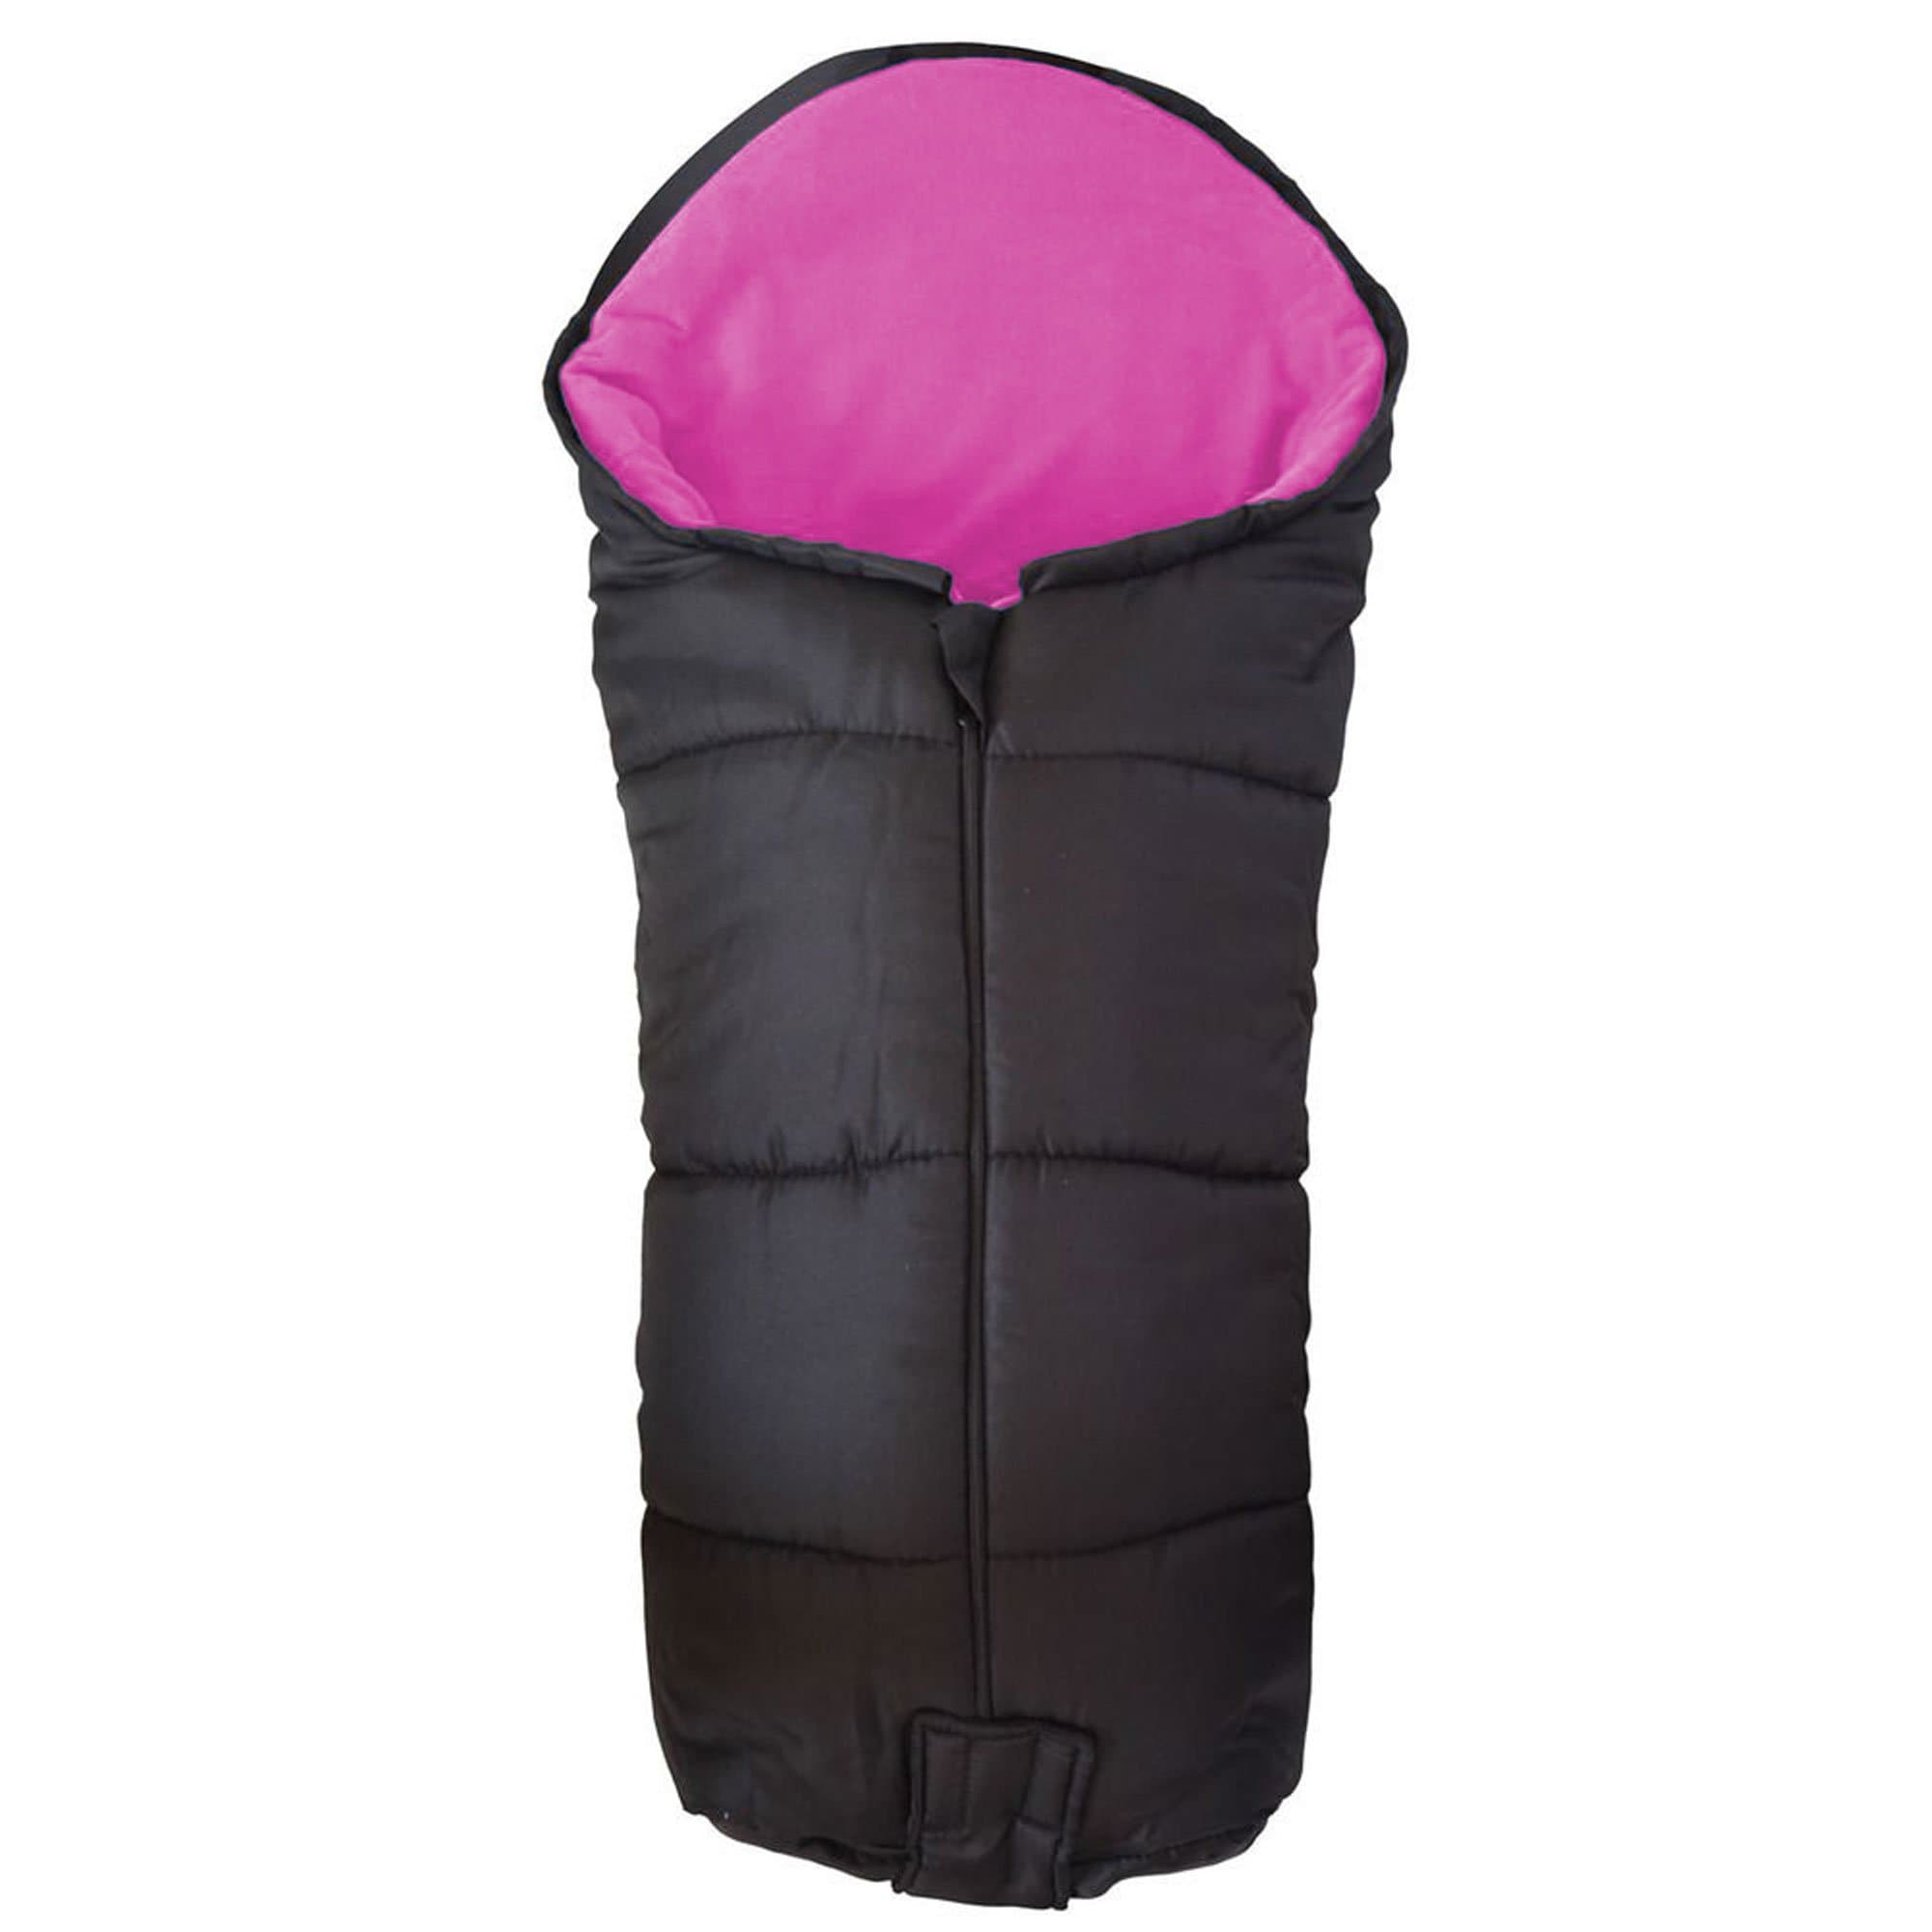 Universal Deluxe Pushchair Footmuff / Cosy Toes - Fits All Pushchairs / Prams And Buggies Pink Fits All Models 